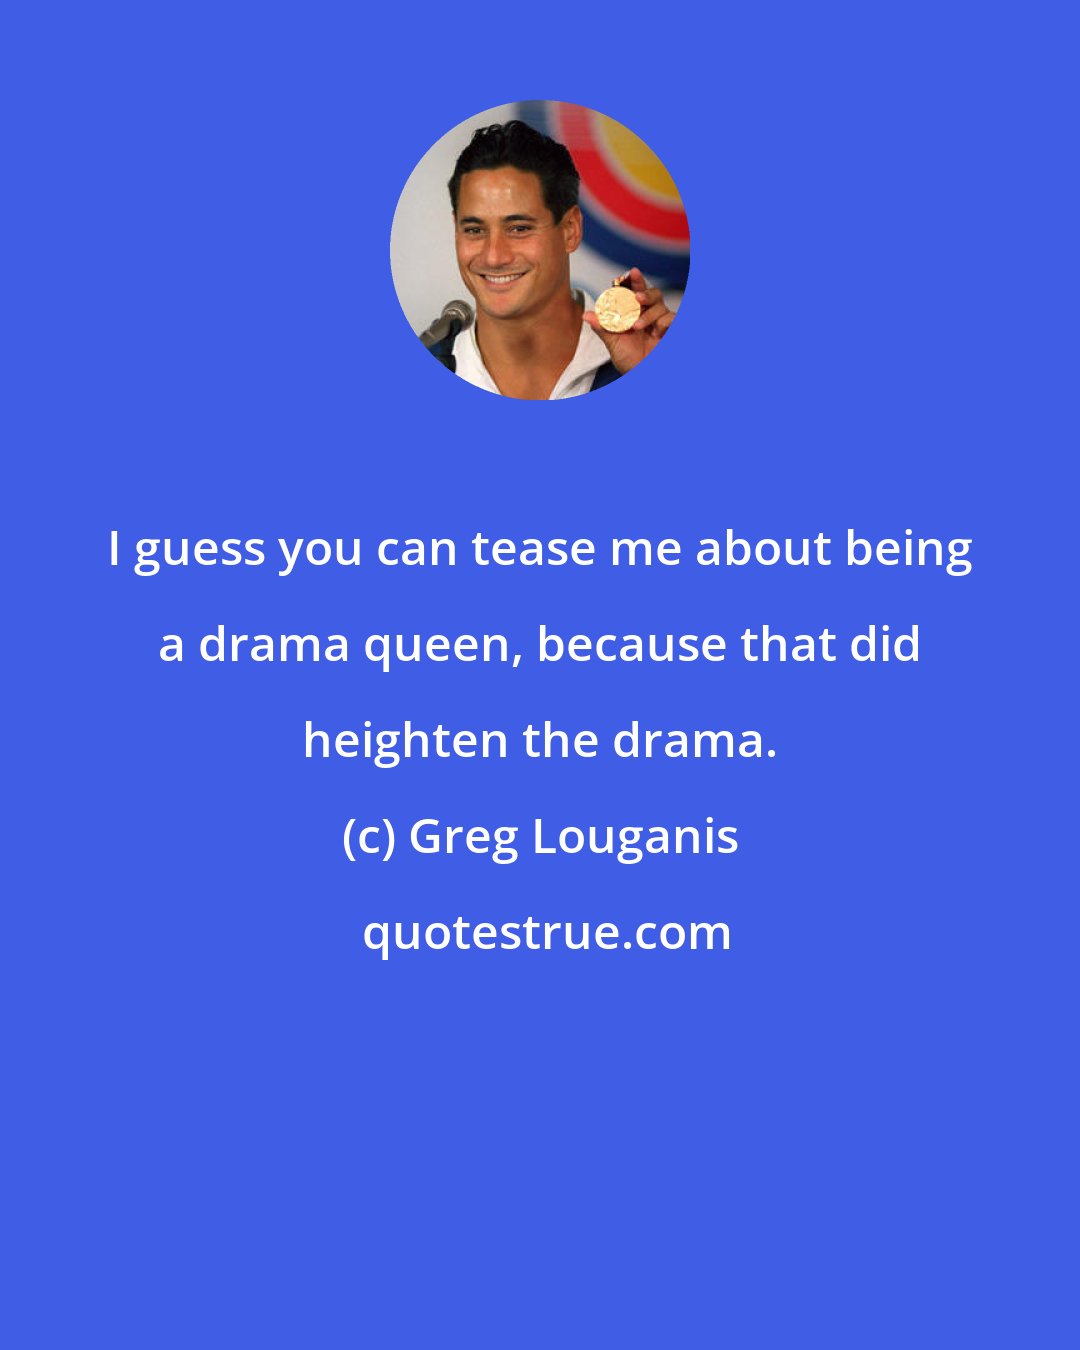 Greg Louganis: I guess you can tease me about being a drama queen, because that did heighten the drama.